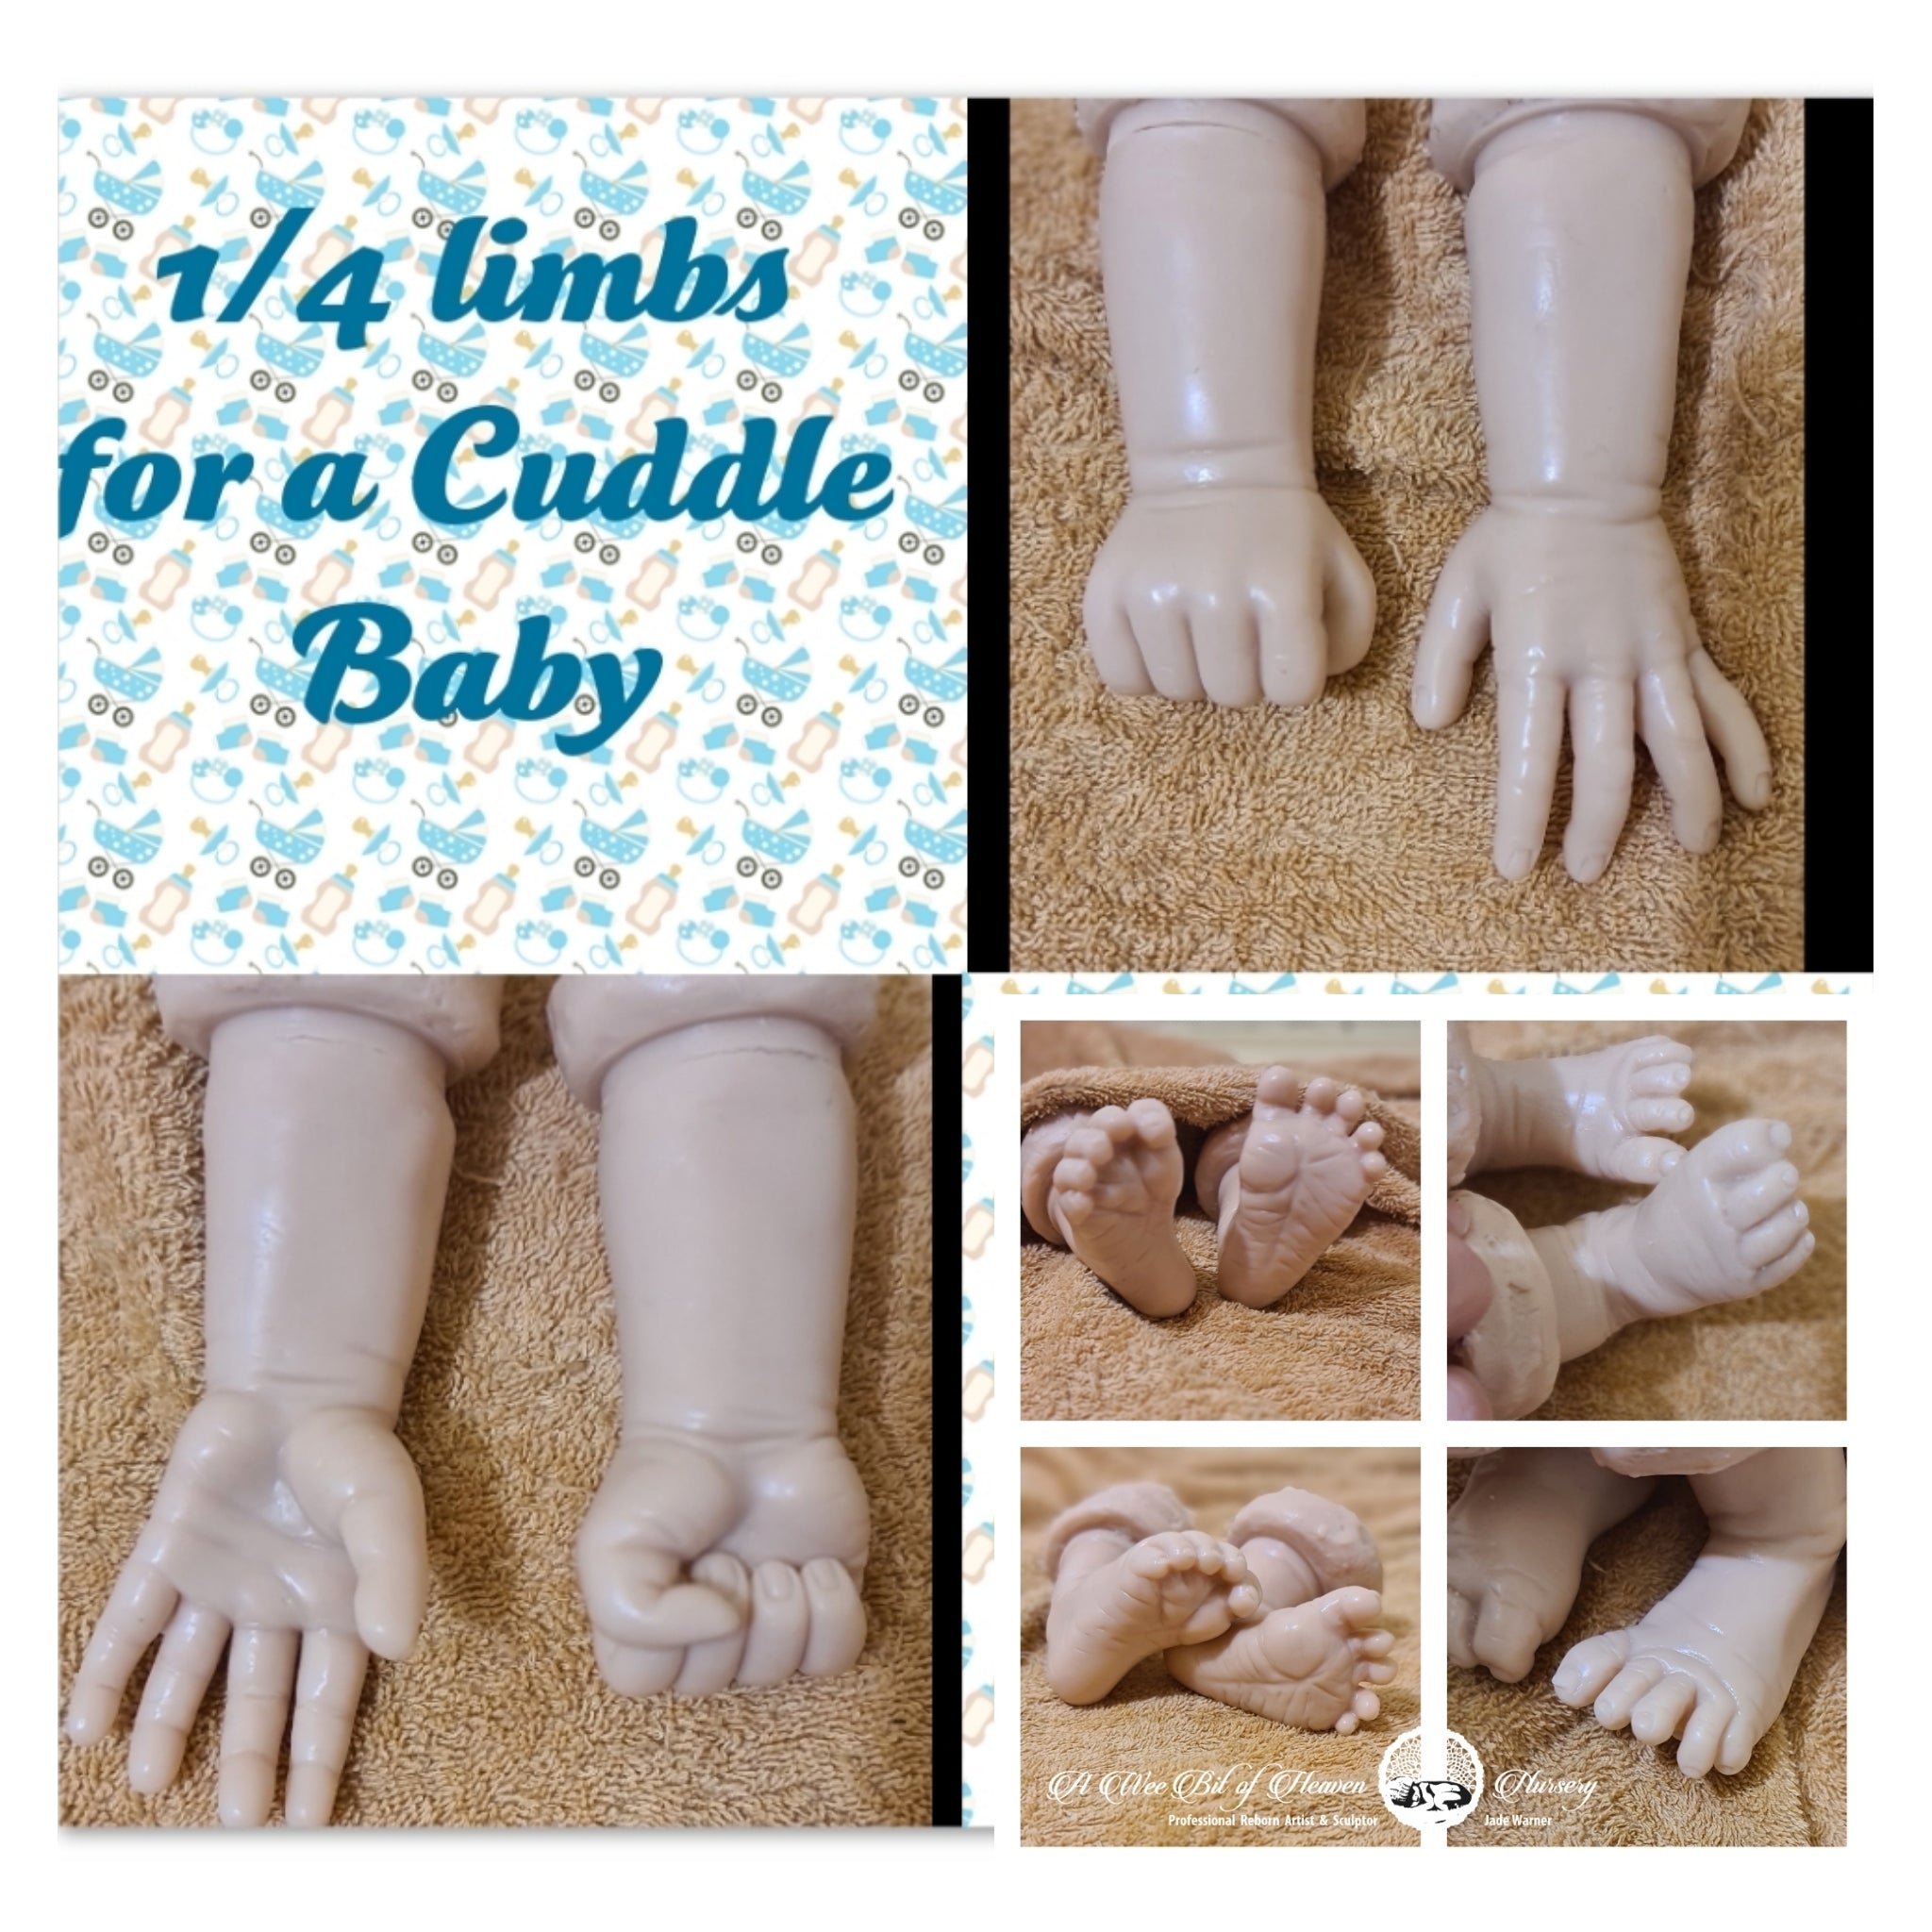 Silicone  1/4 limbs for a 19 -20" Baby